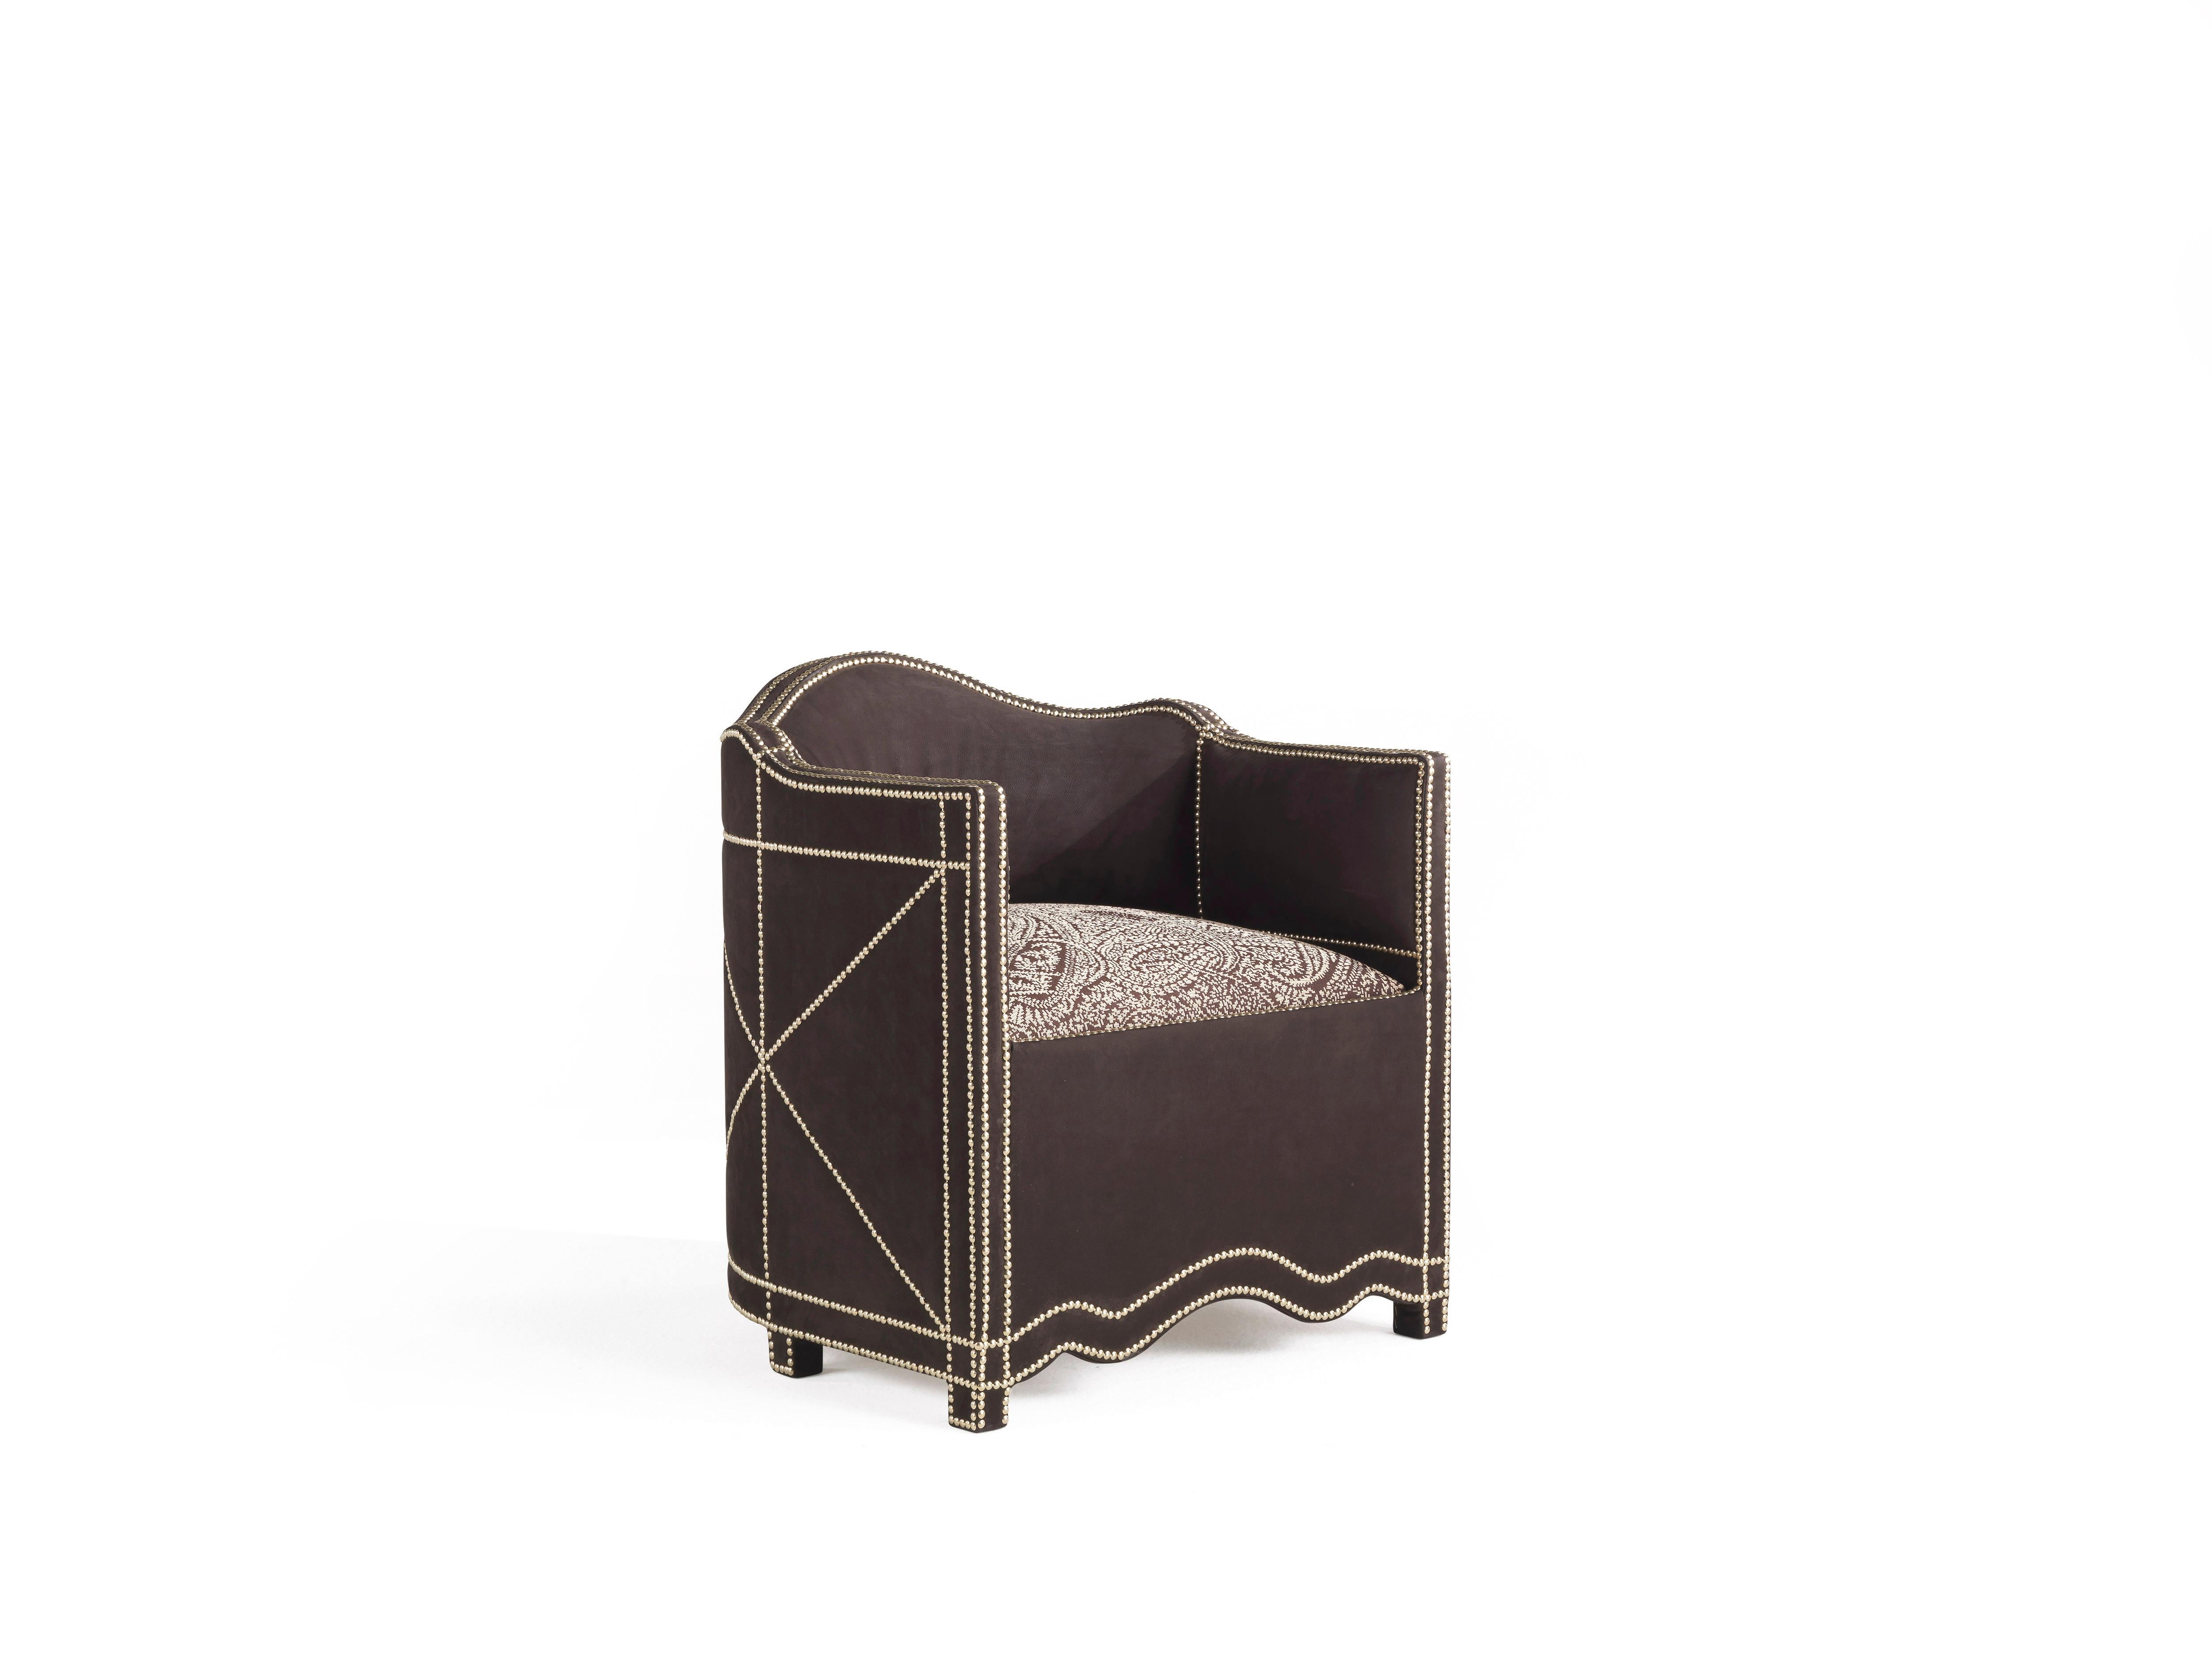 An armchair full of meanings and references. The studded profile creates a play of geometry that resembles the African shields in the shape, as well as the color, a warm and intense brown, which evokes the African lands. The fabric with paisley